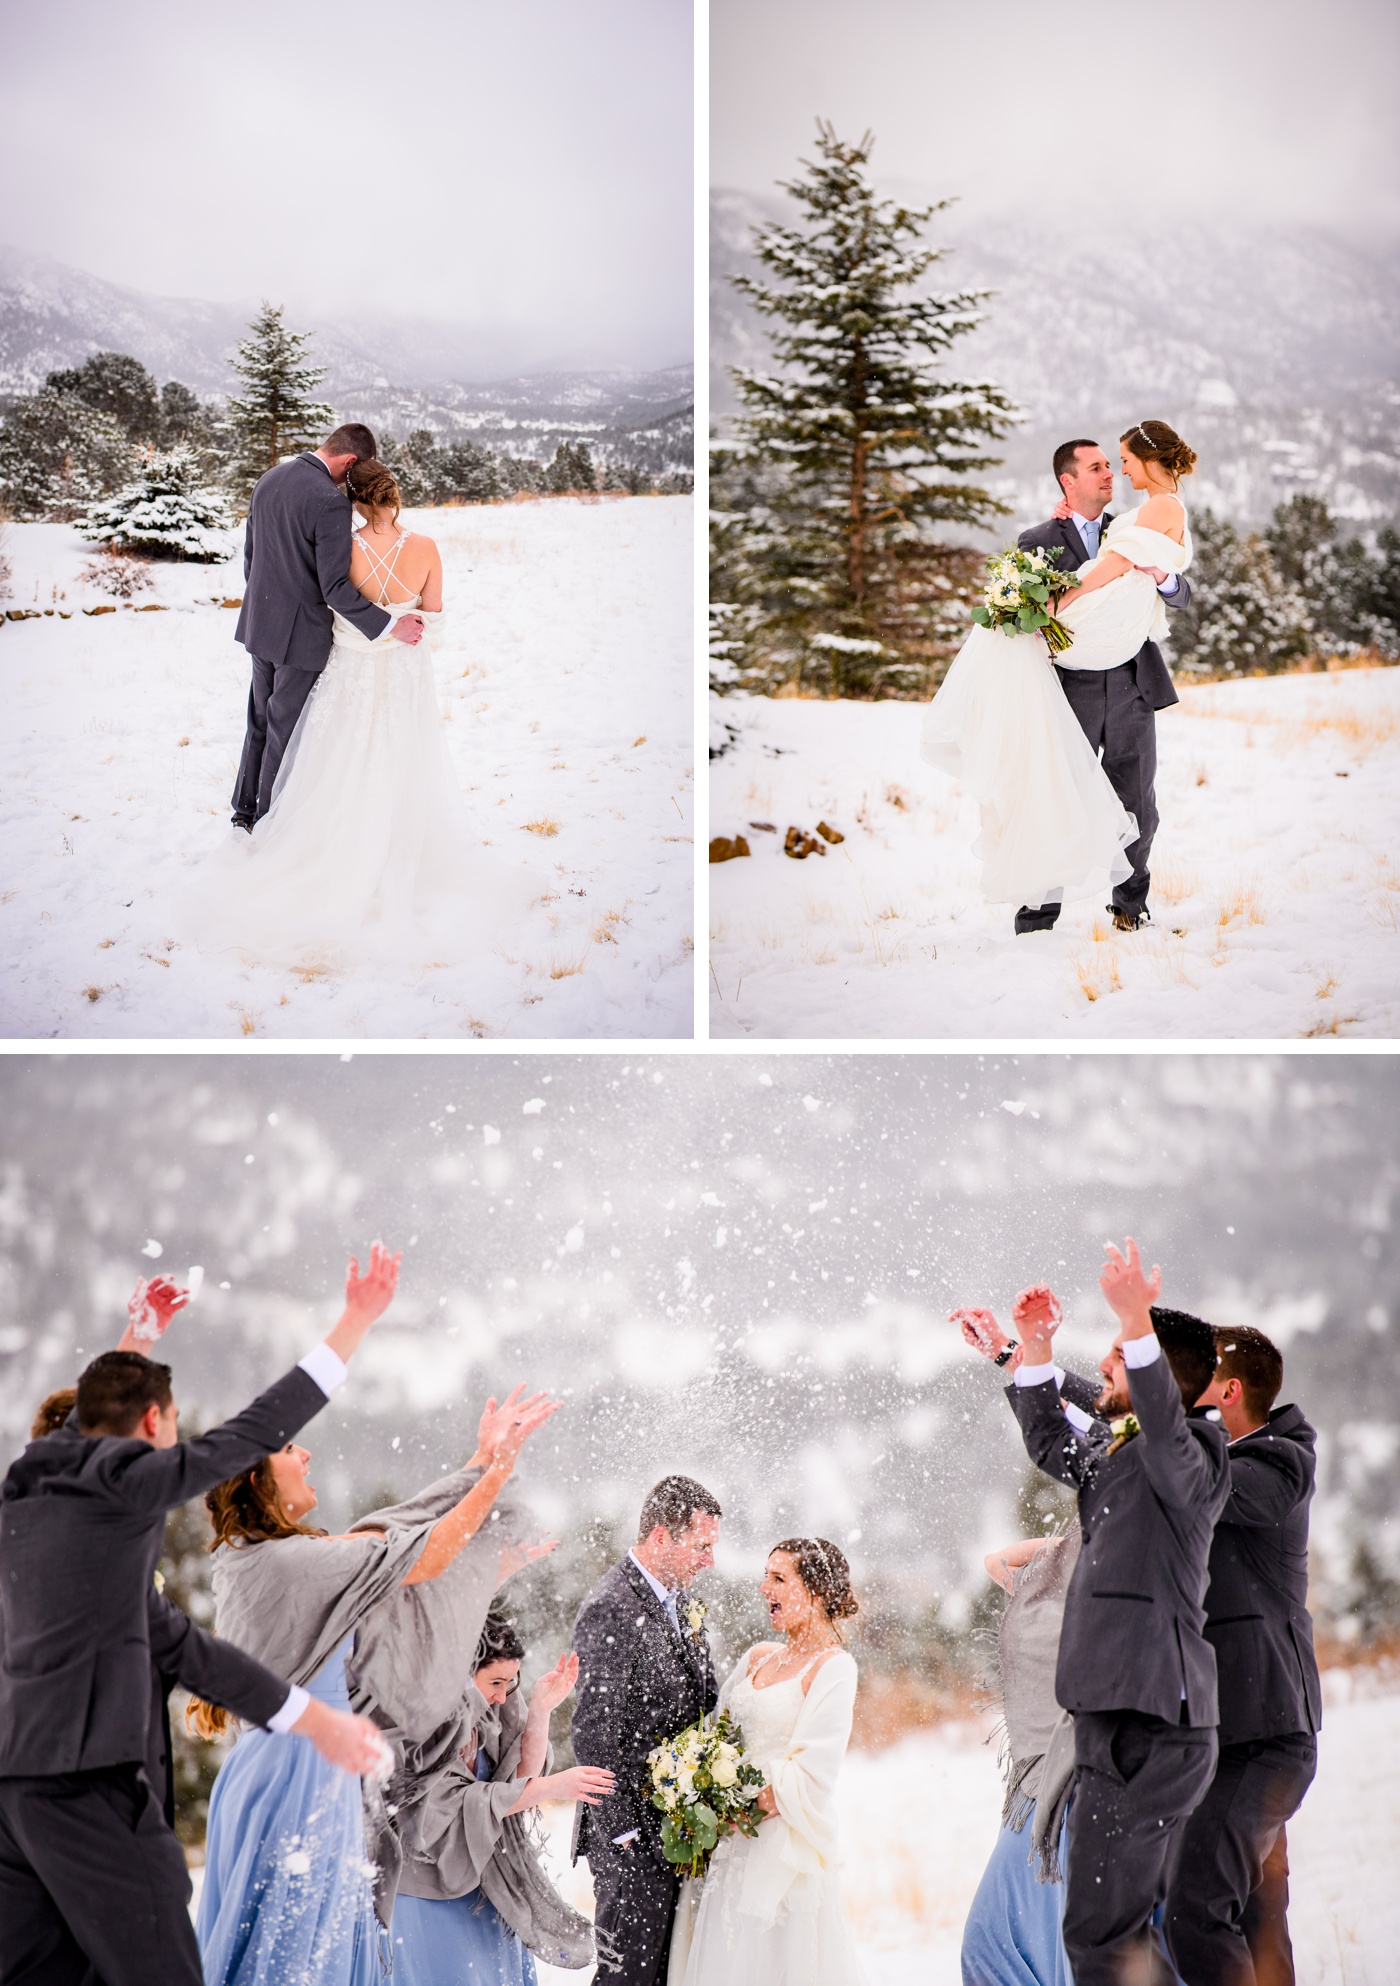 Bride and groom portraits in the snow at Taharaa Mountain Lodge